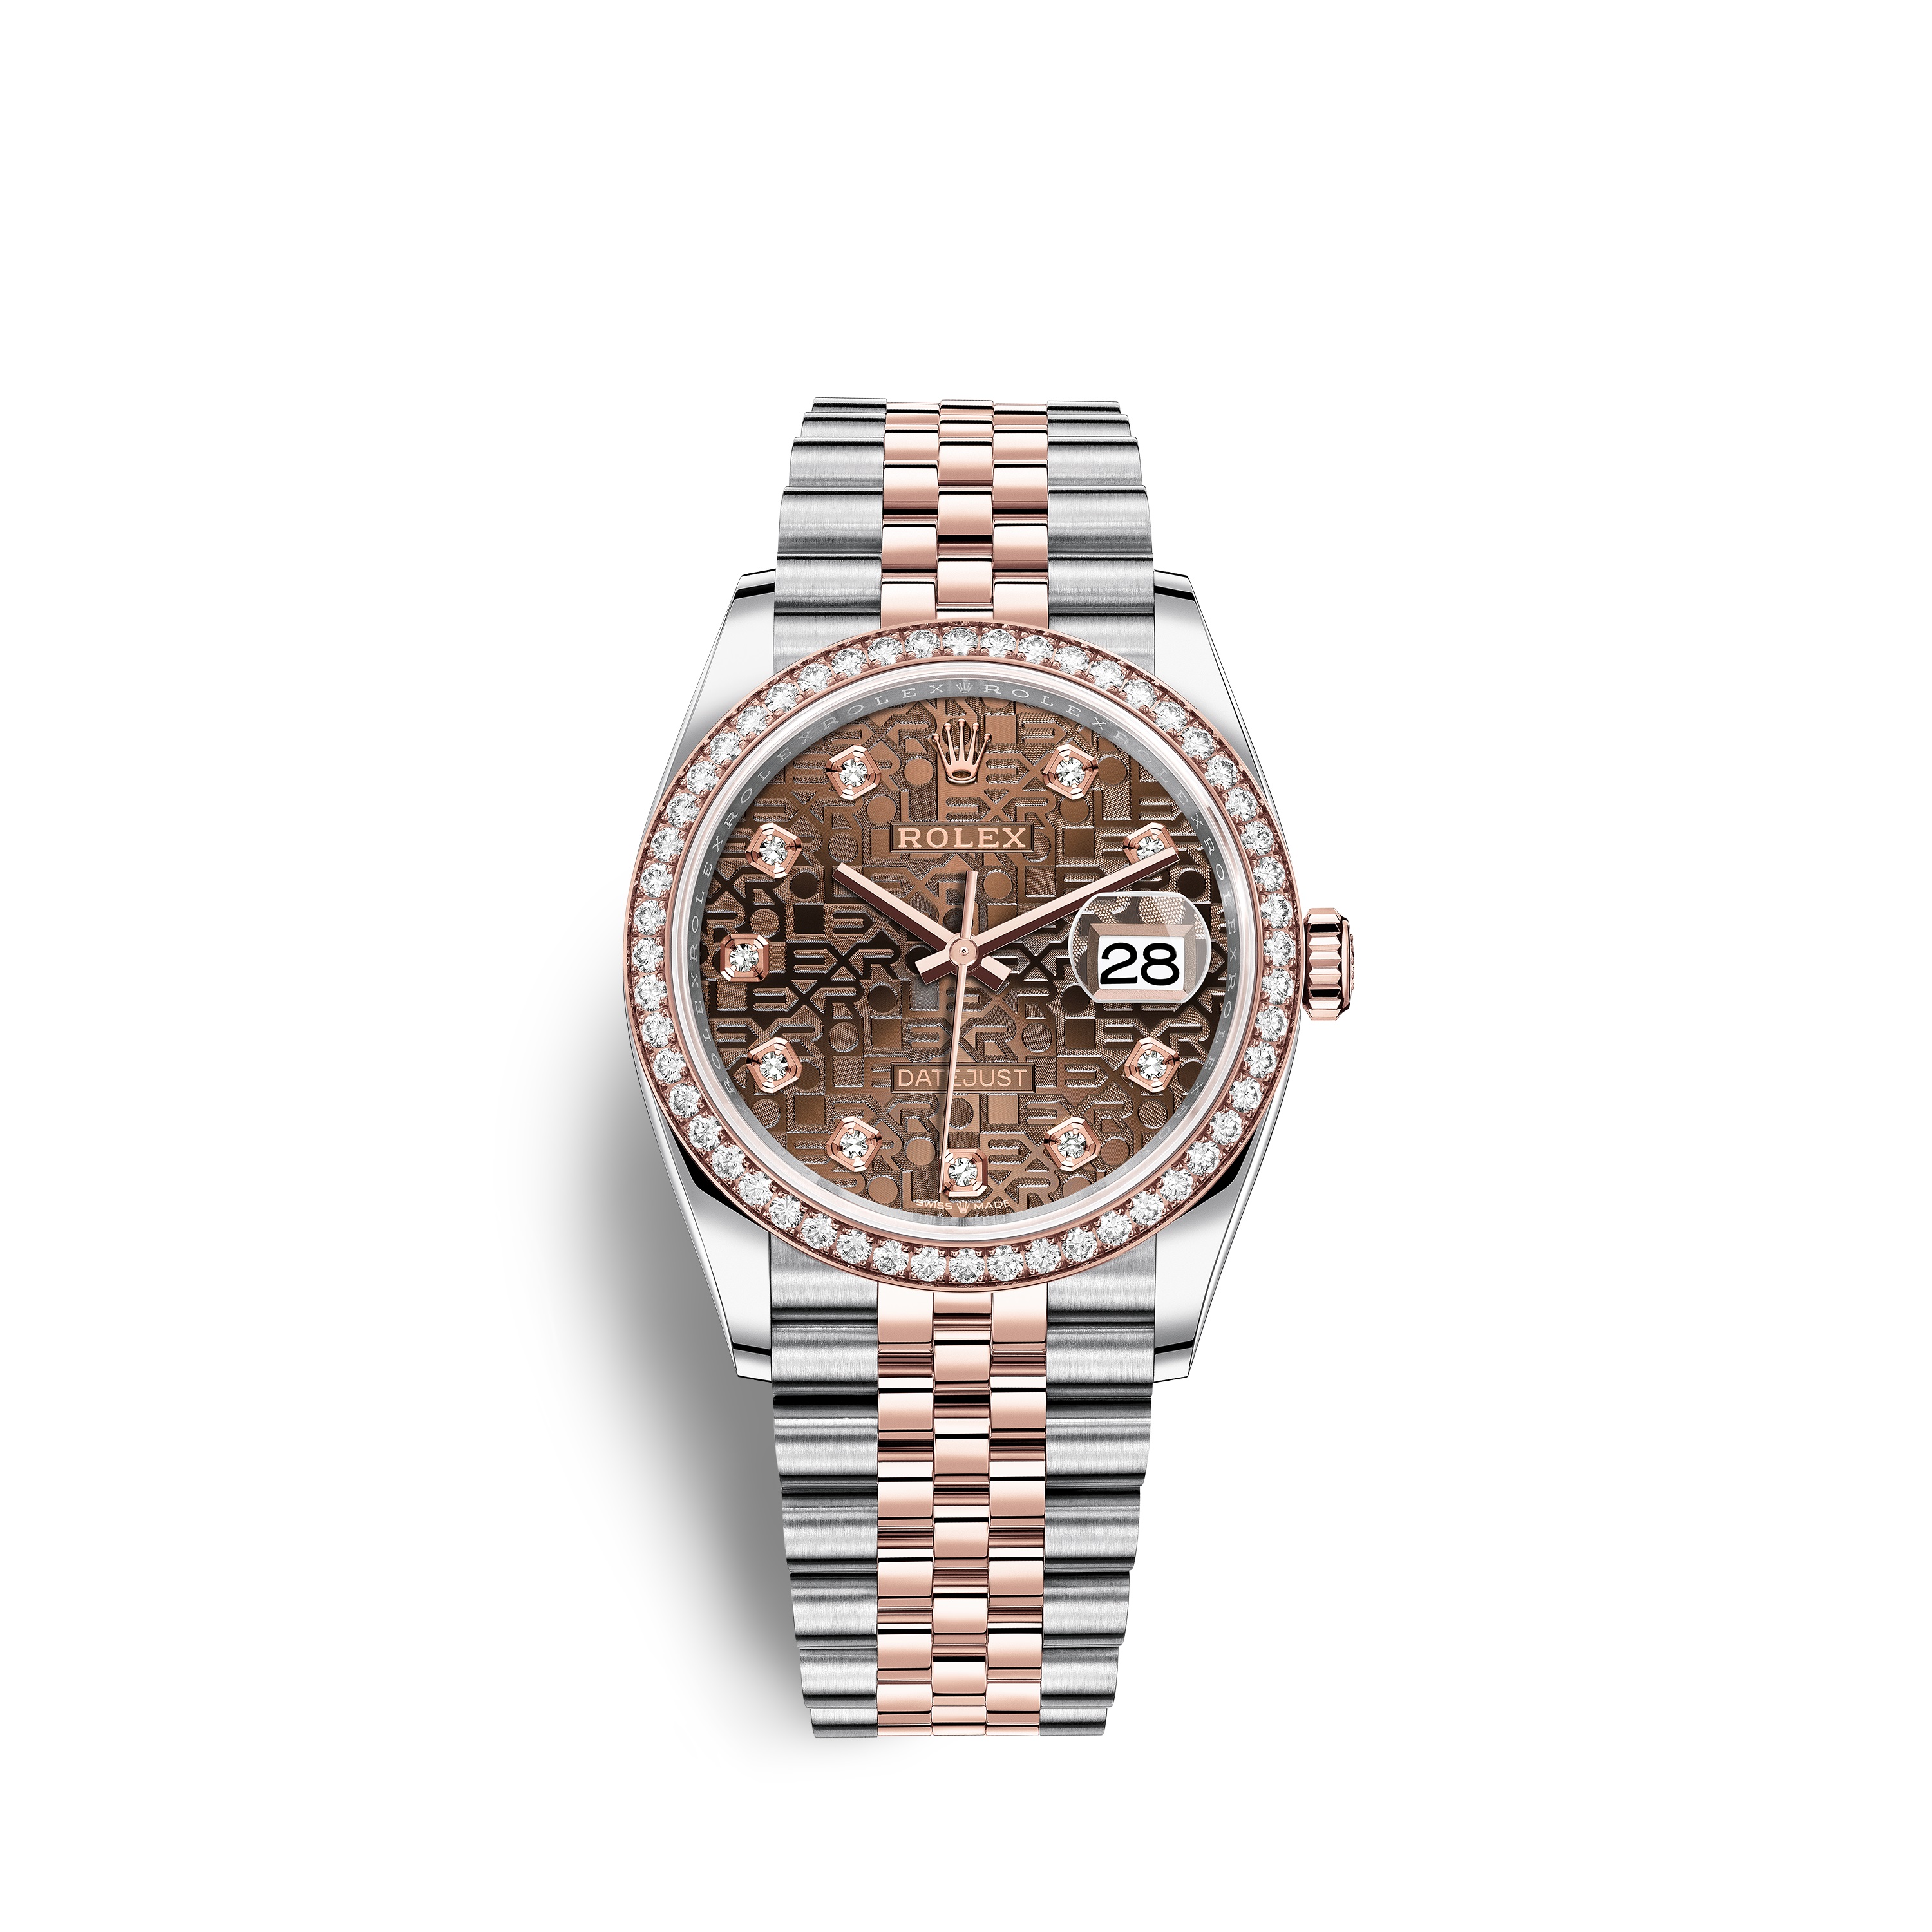 Datejust 36 126281RBR Rose Gold & Stainless Steel Watch (Chocolate Jubilee Design Set with Diamonds)